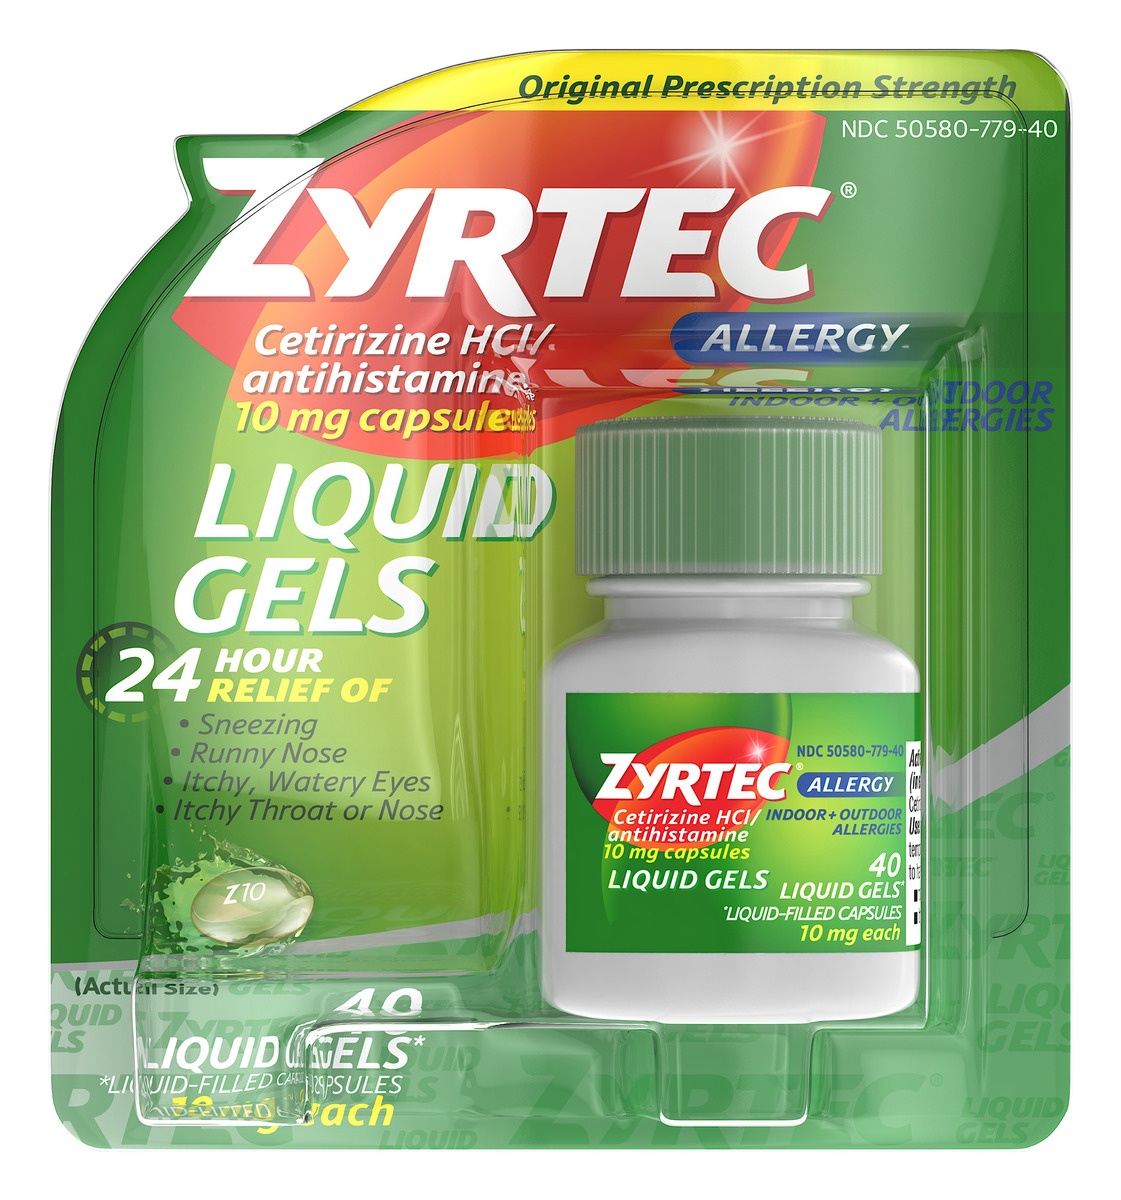 slide 1 of 6, Zyrtec 24 Hour Allergy Relief Liquid Gels, Antihistamine Capsules with Cetirizine Hydrochloride Allergy Medicine for All-Day Relief from Runny Nose, Sneezing, Itchy Eyes & More, 40 ct